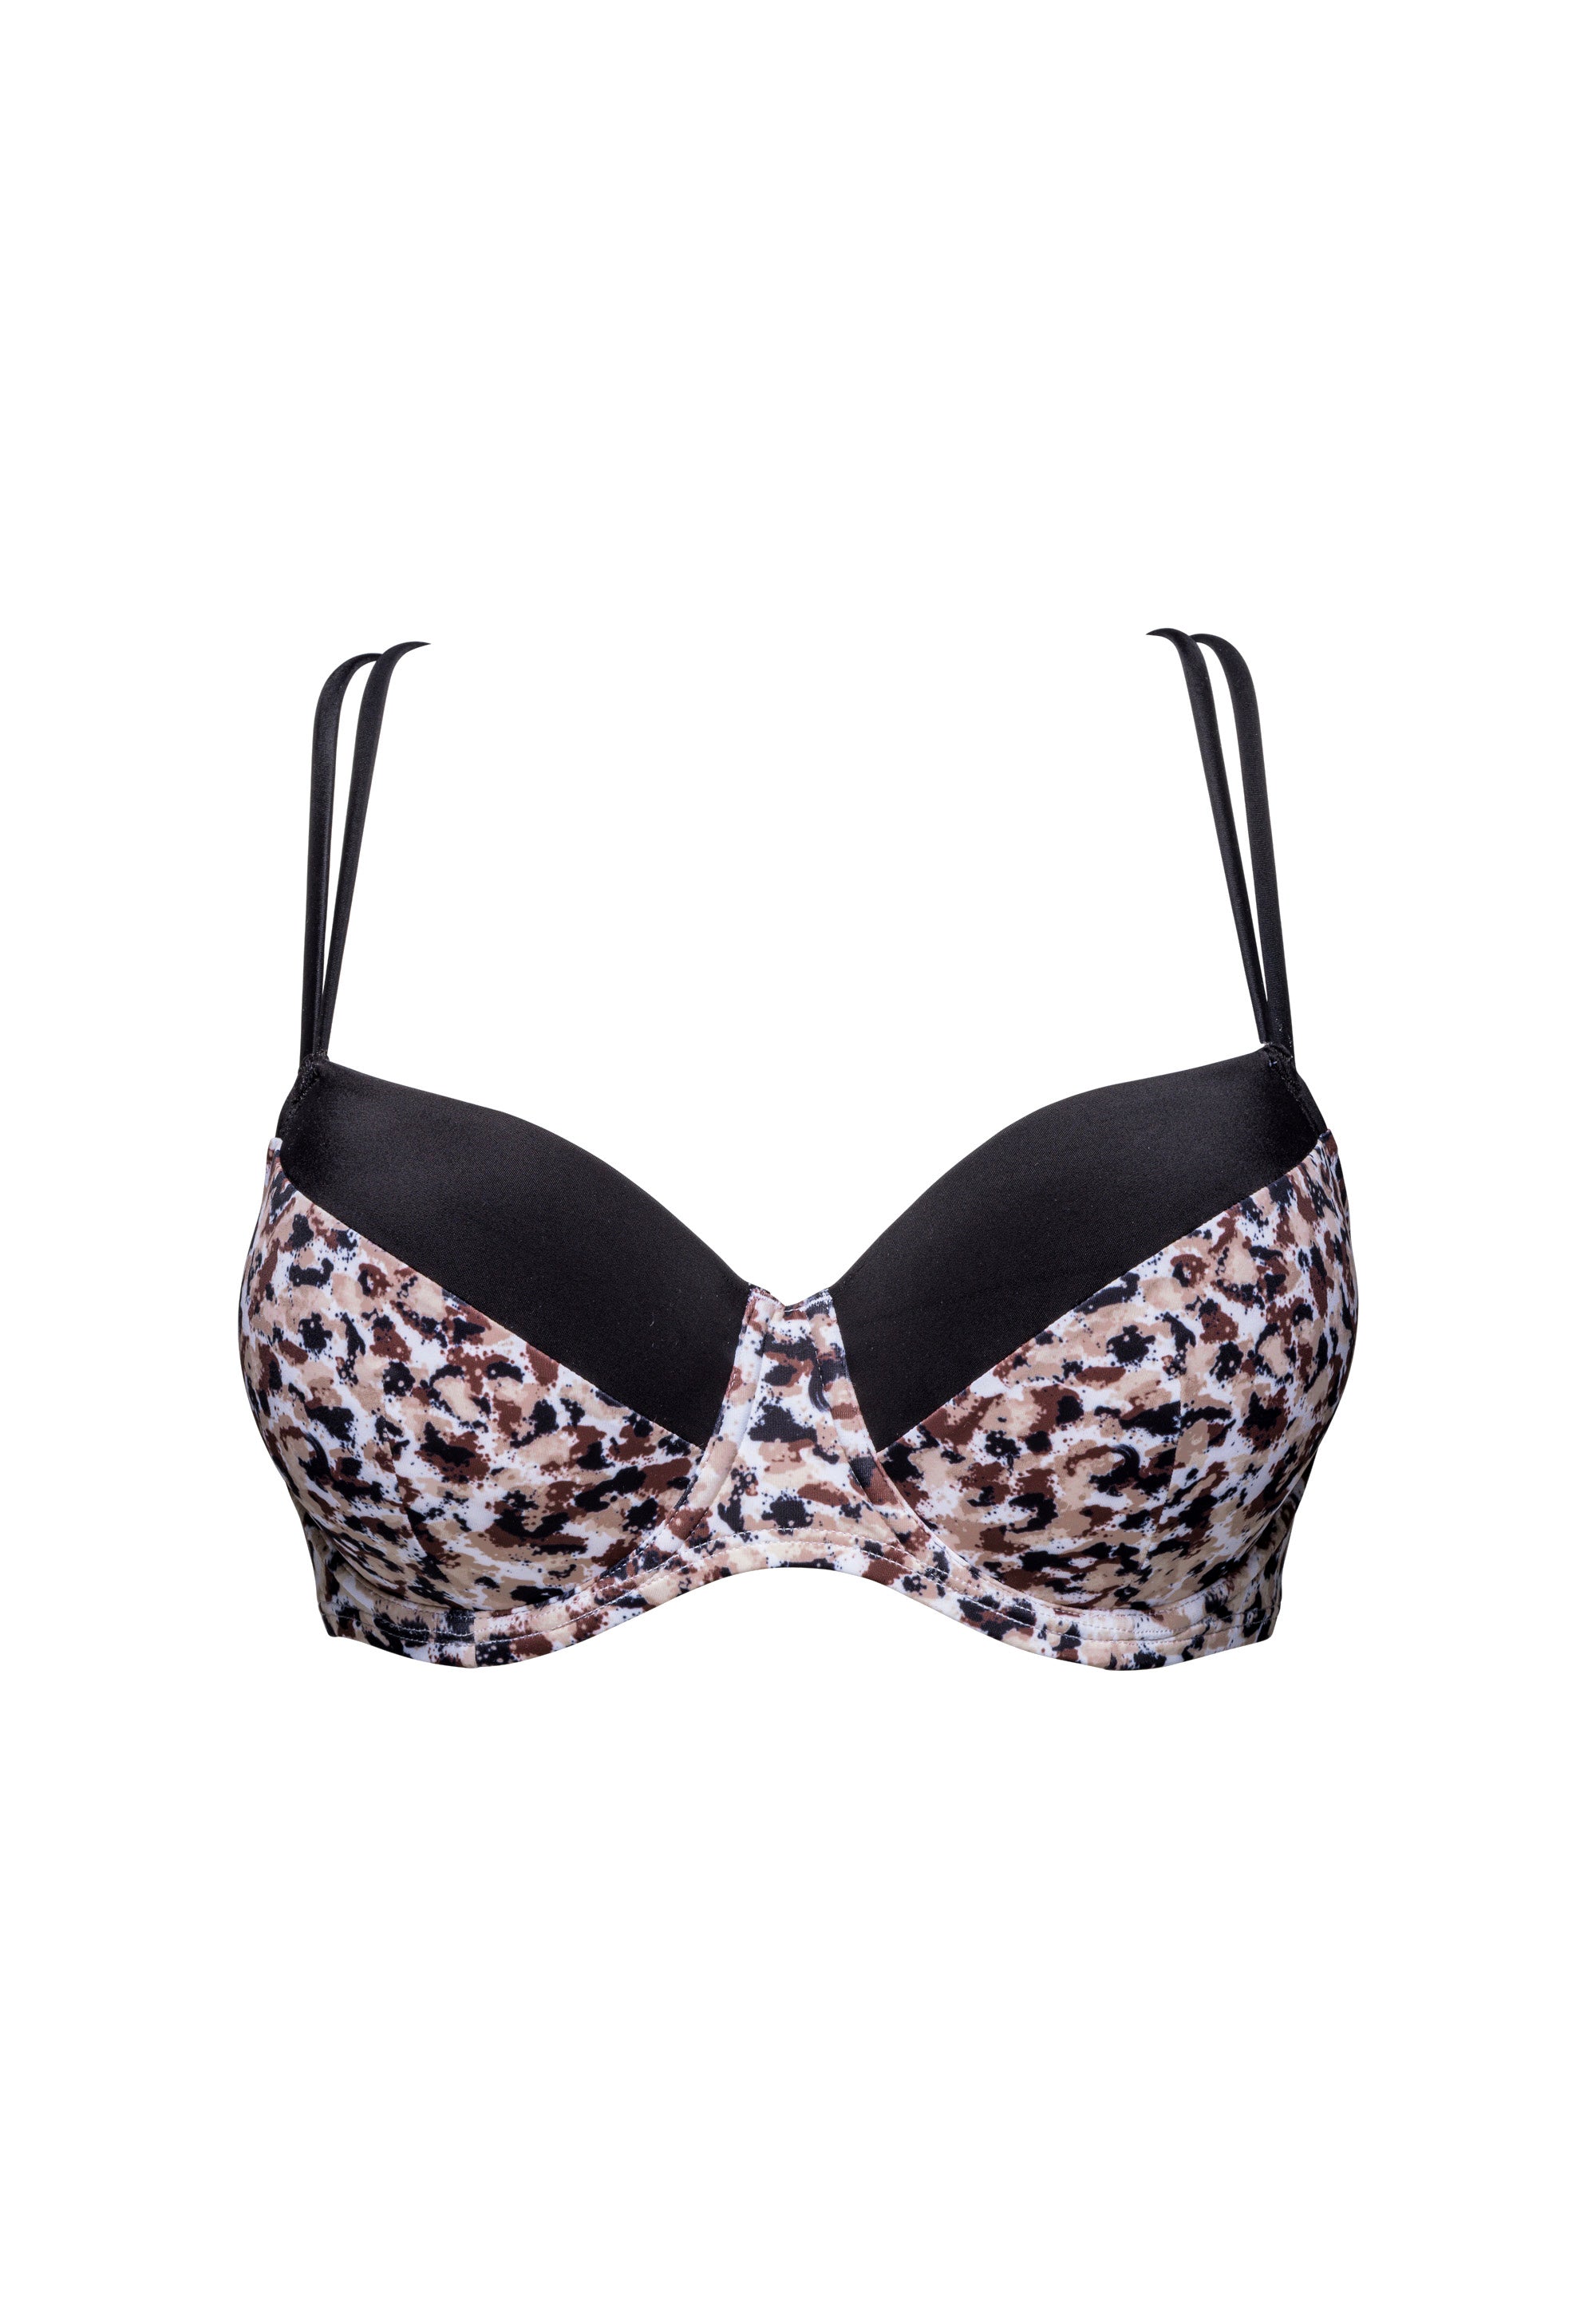 Sunset Stay Animal Print Underwired Swimsuit Top Black Sand